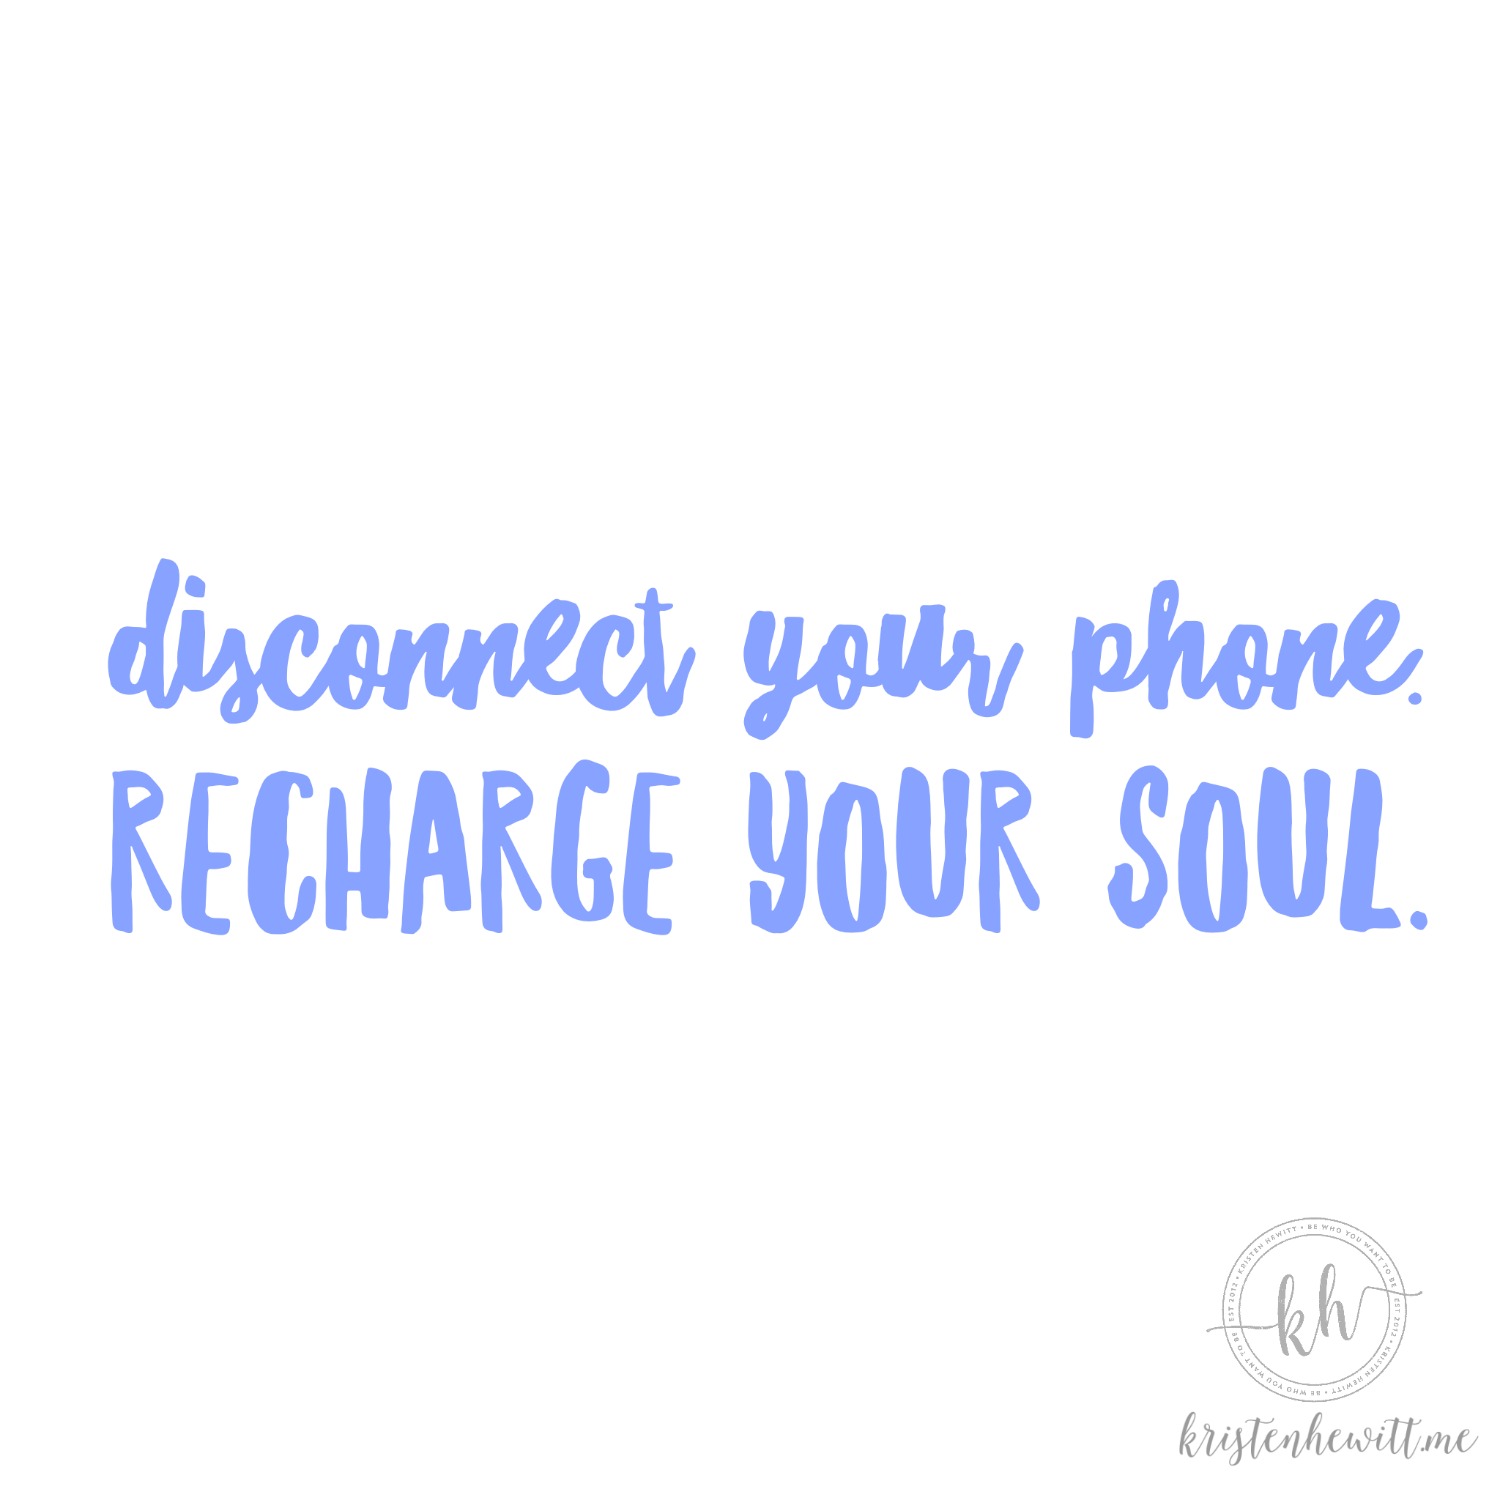 Have you ever REALLY taken a social media timeout? Turned off your phone and disconnected? Here's how turning off your phone for three days can change your life!